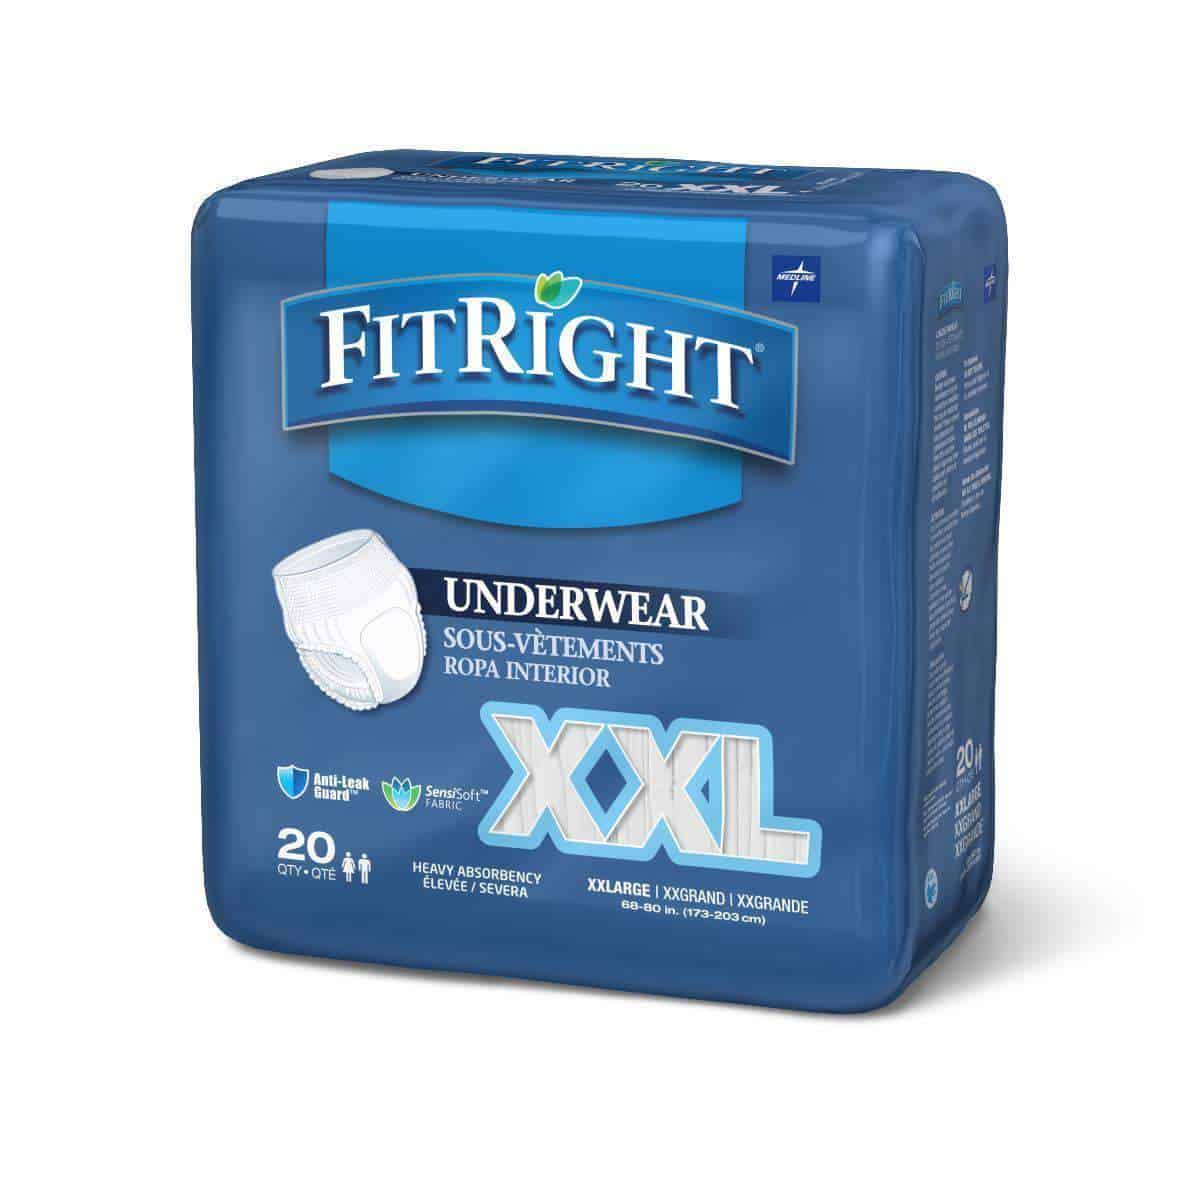 FitRight Adult Incontinence Underwear Heavy Absorbency - XX-Large, 68"-80"  Case 80 - Senior.com Incontinence